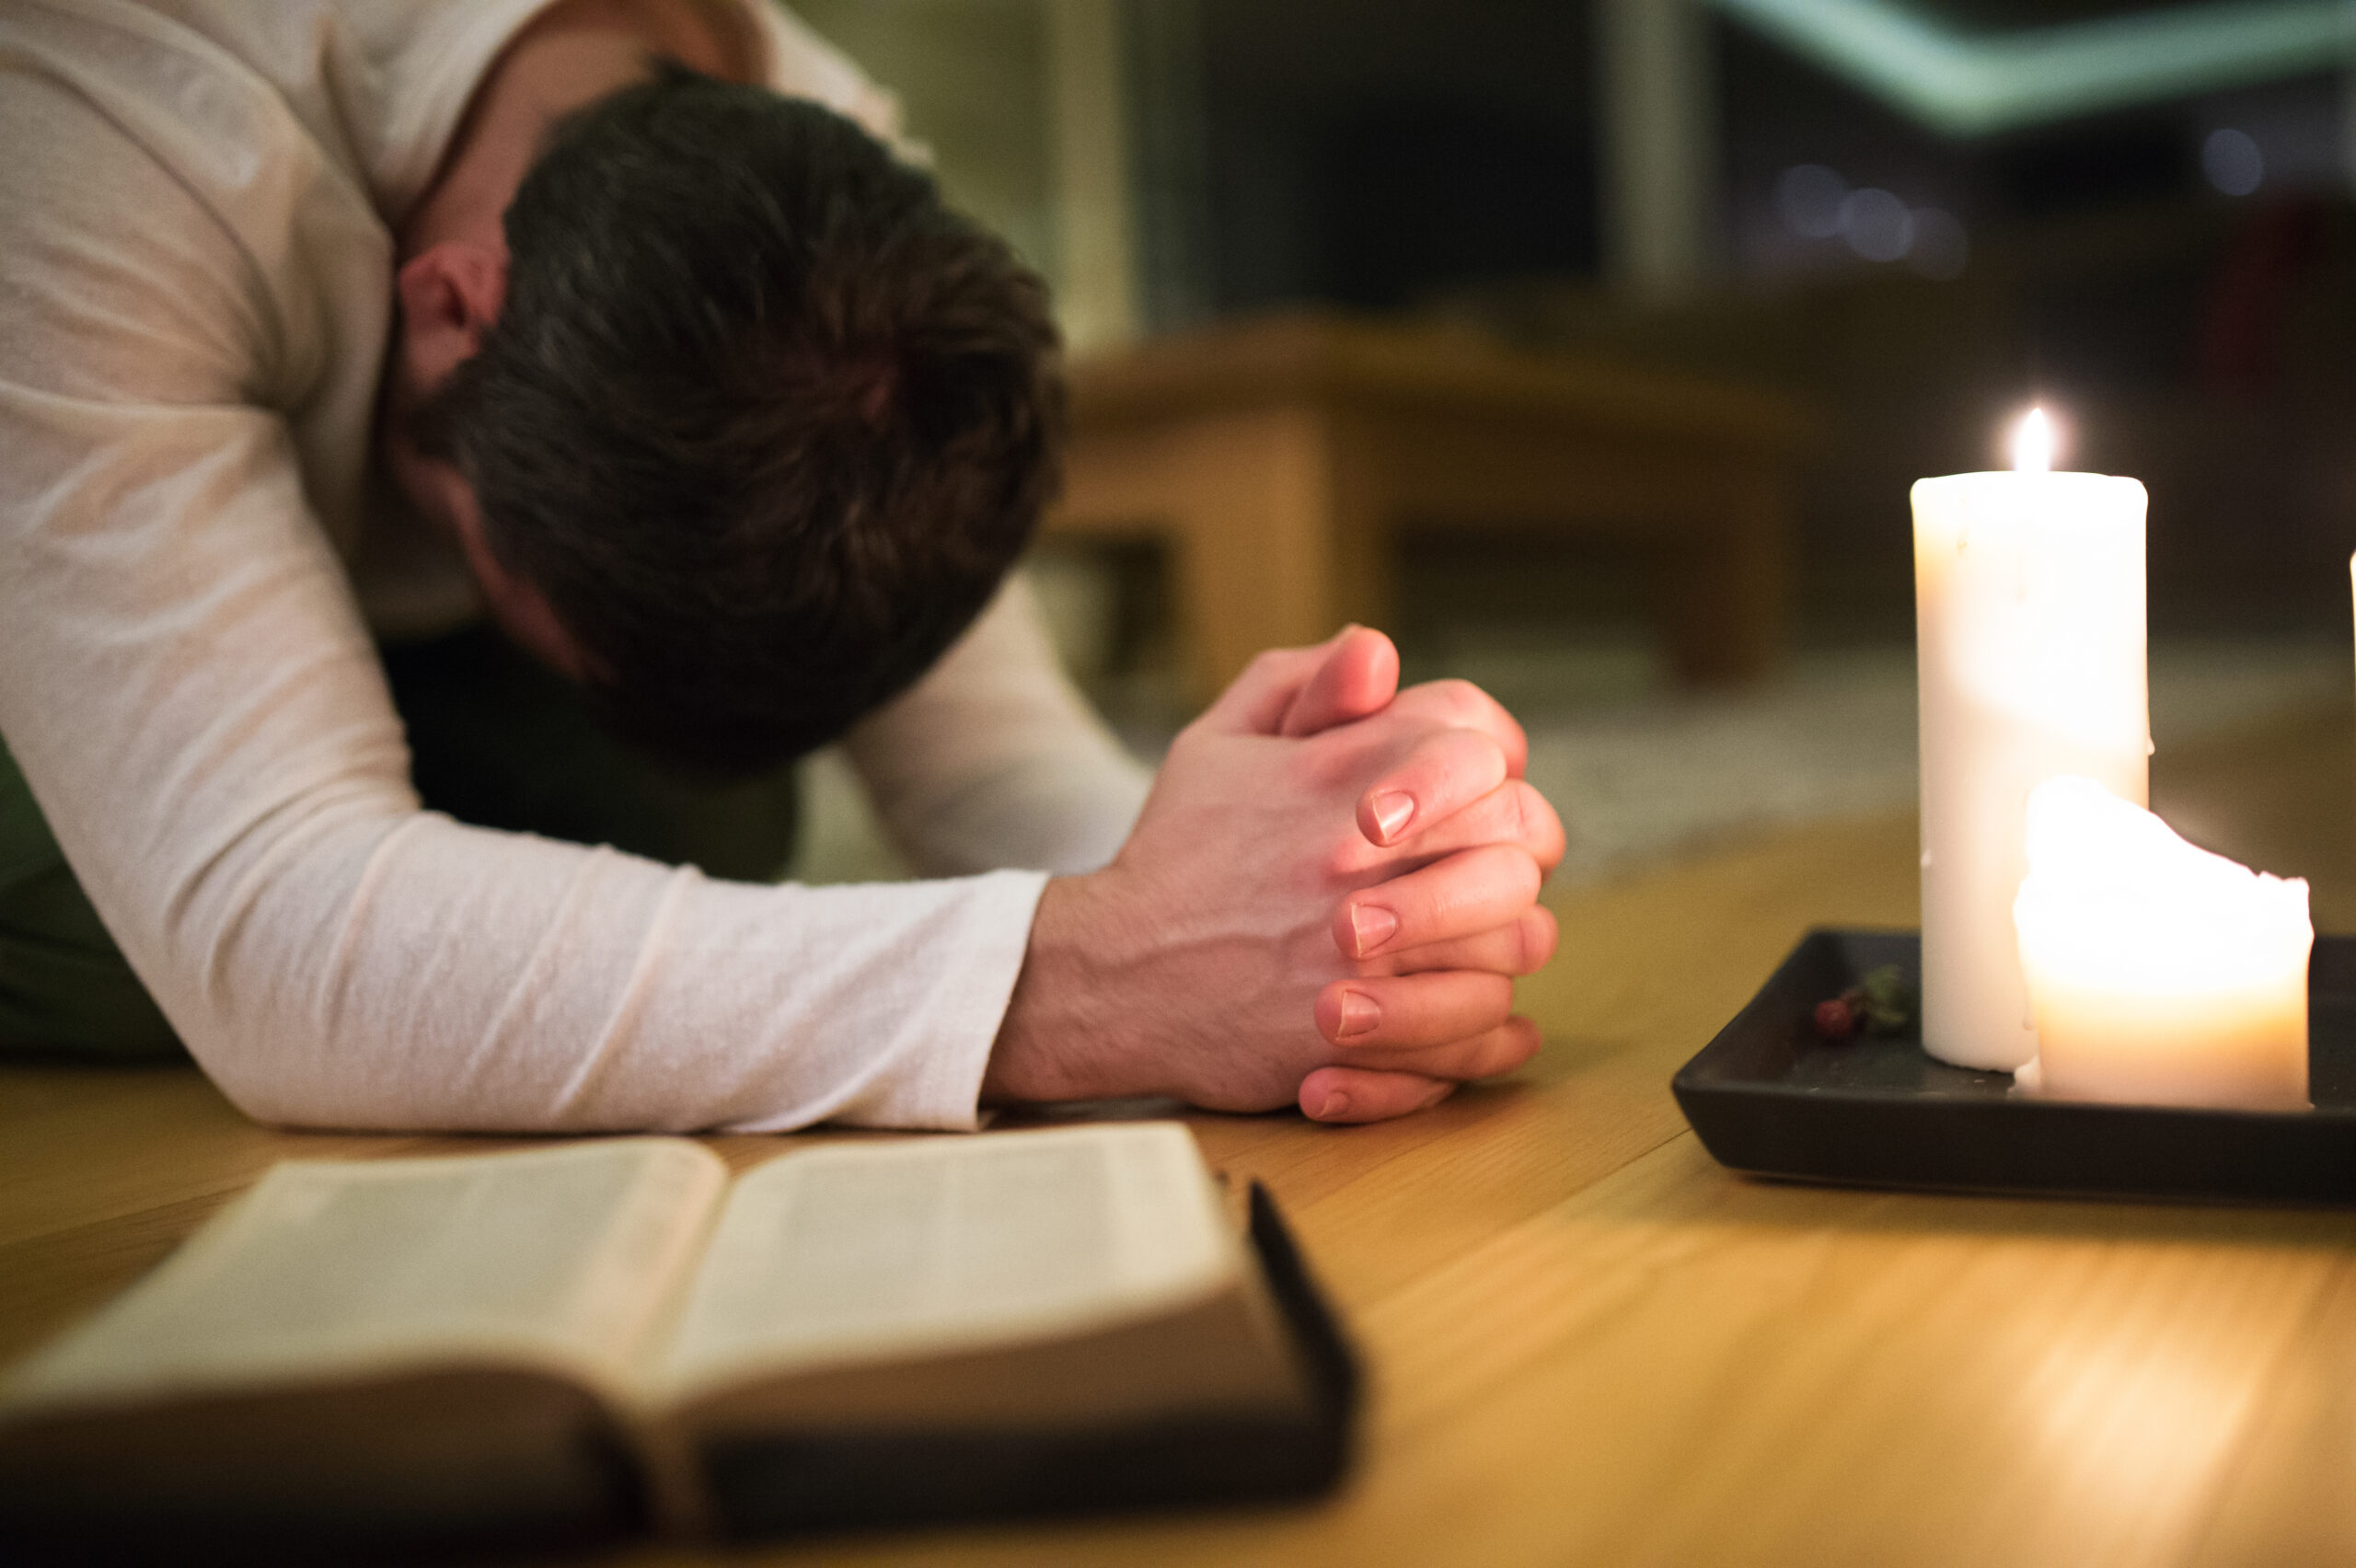 graphicstock unrecognizable young man praying kneeling on the floor hands clasped together bible and burning candles next to him close up rdM7VTOIMW scaled